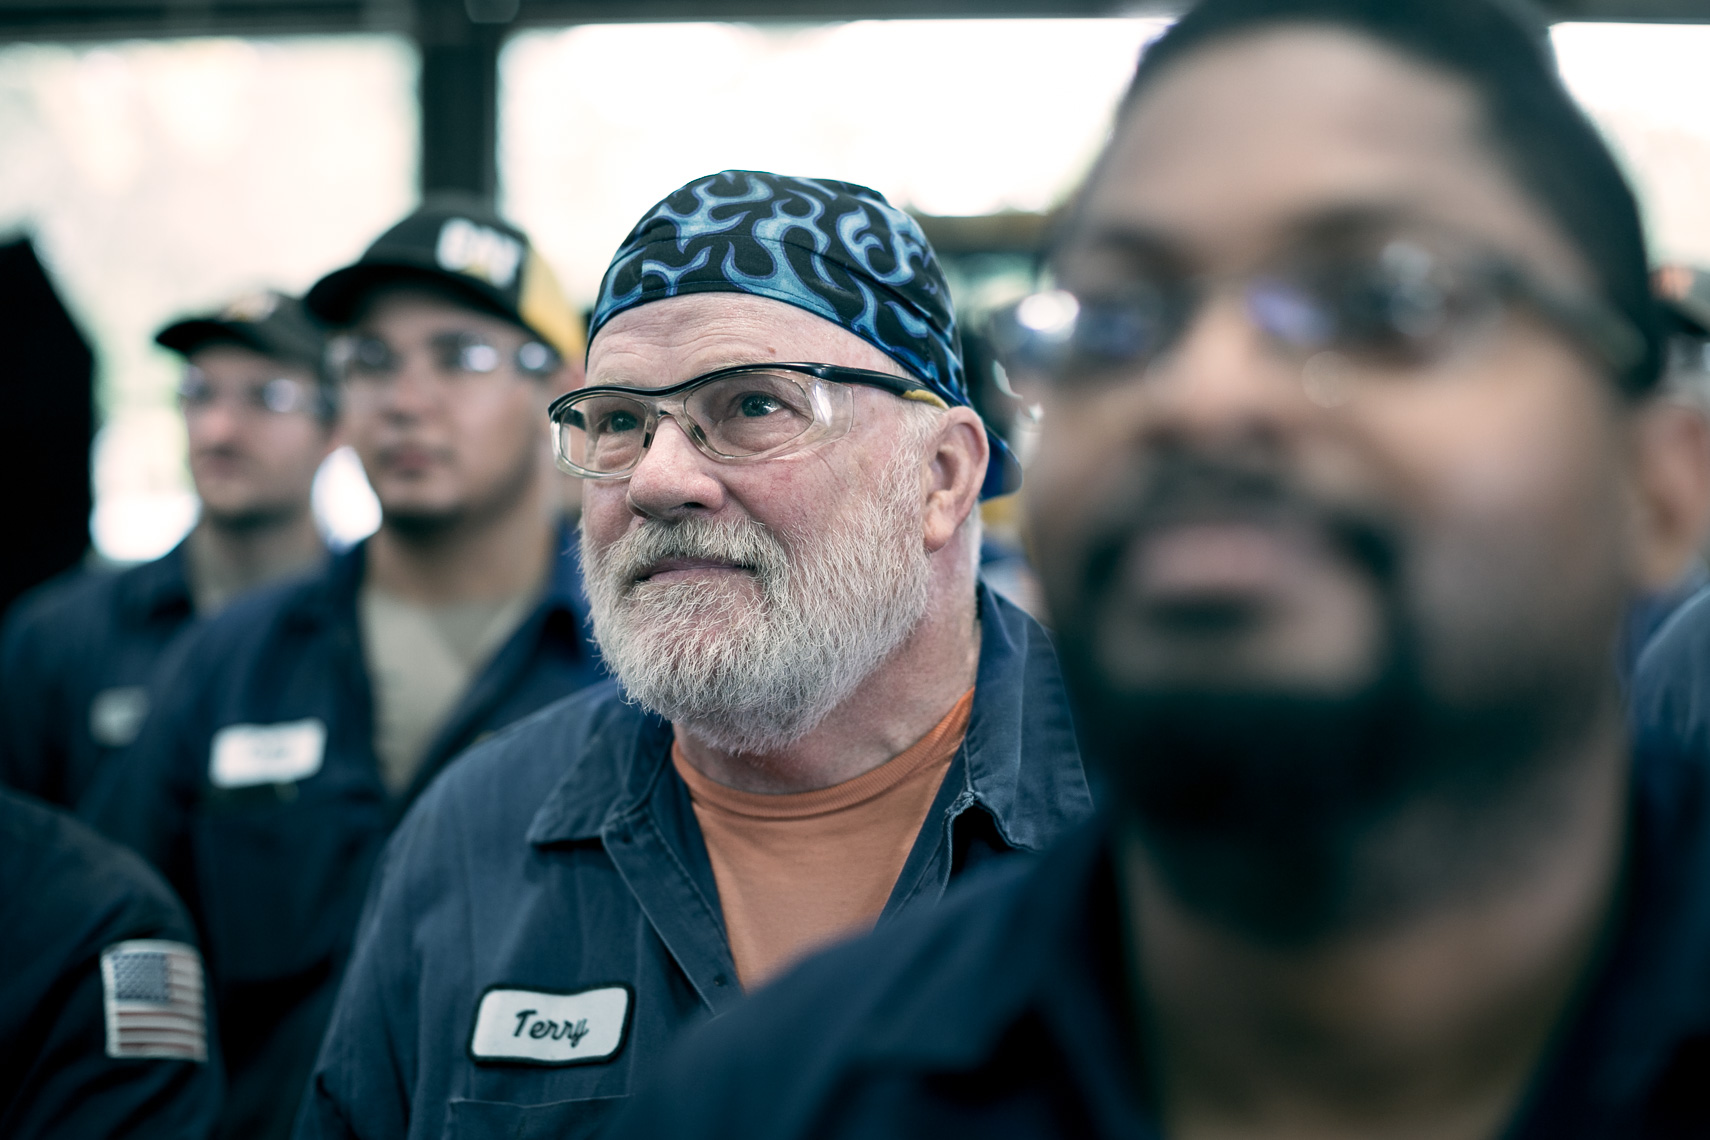 Service_Technicians_for_Gregory_Poole_20190904_photo_by_Justin_Kase_Conder_1391-Edit_CAT_II